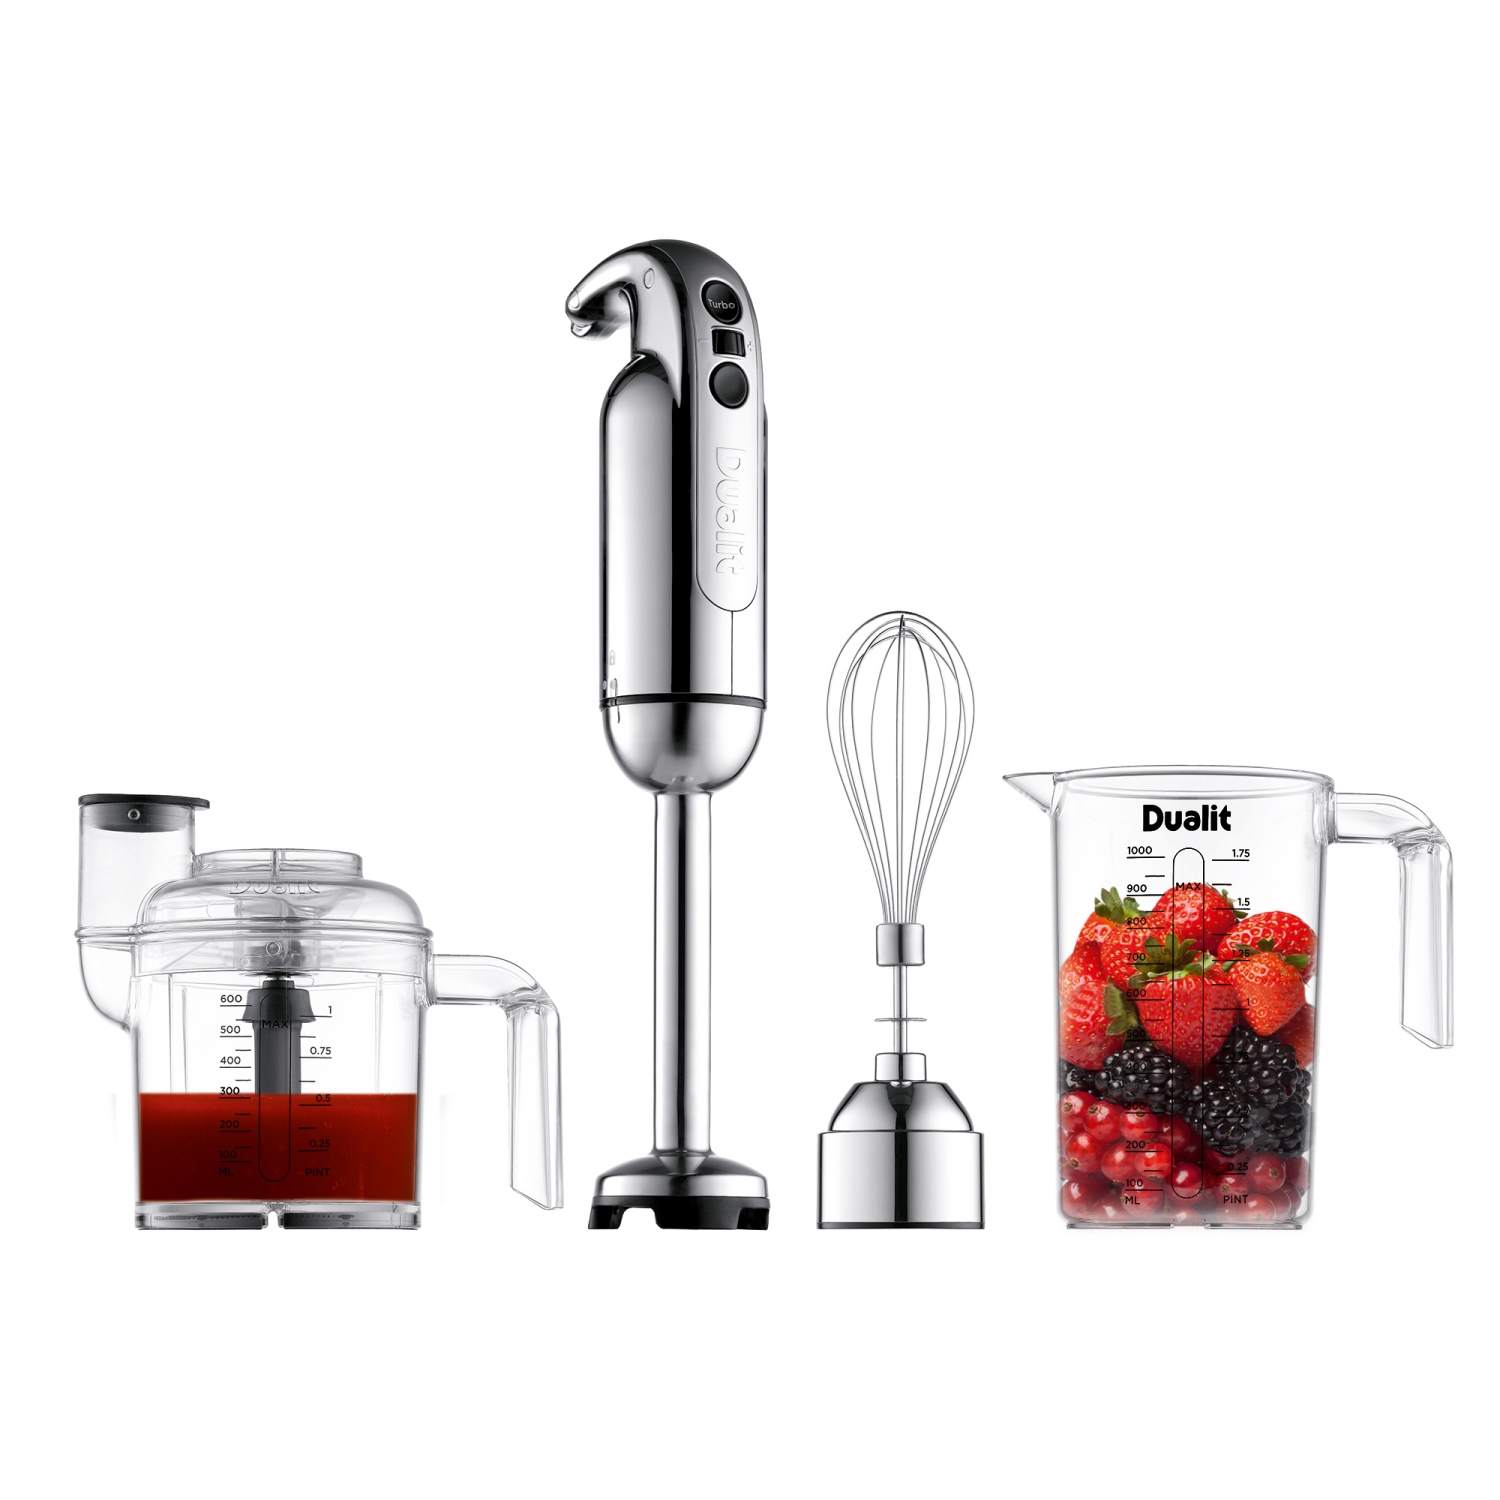 Dualit 700W Hand Blender With Accessories